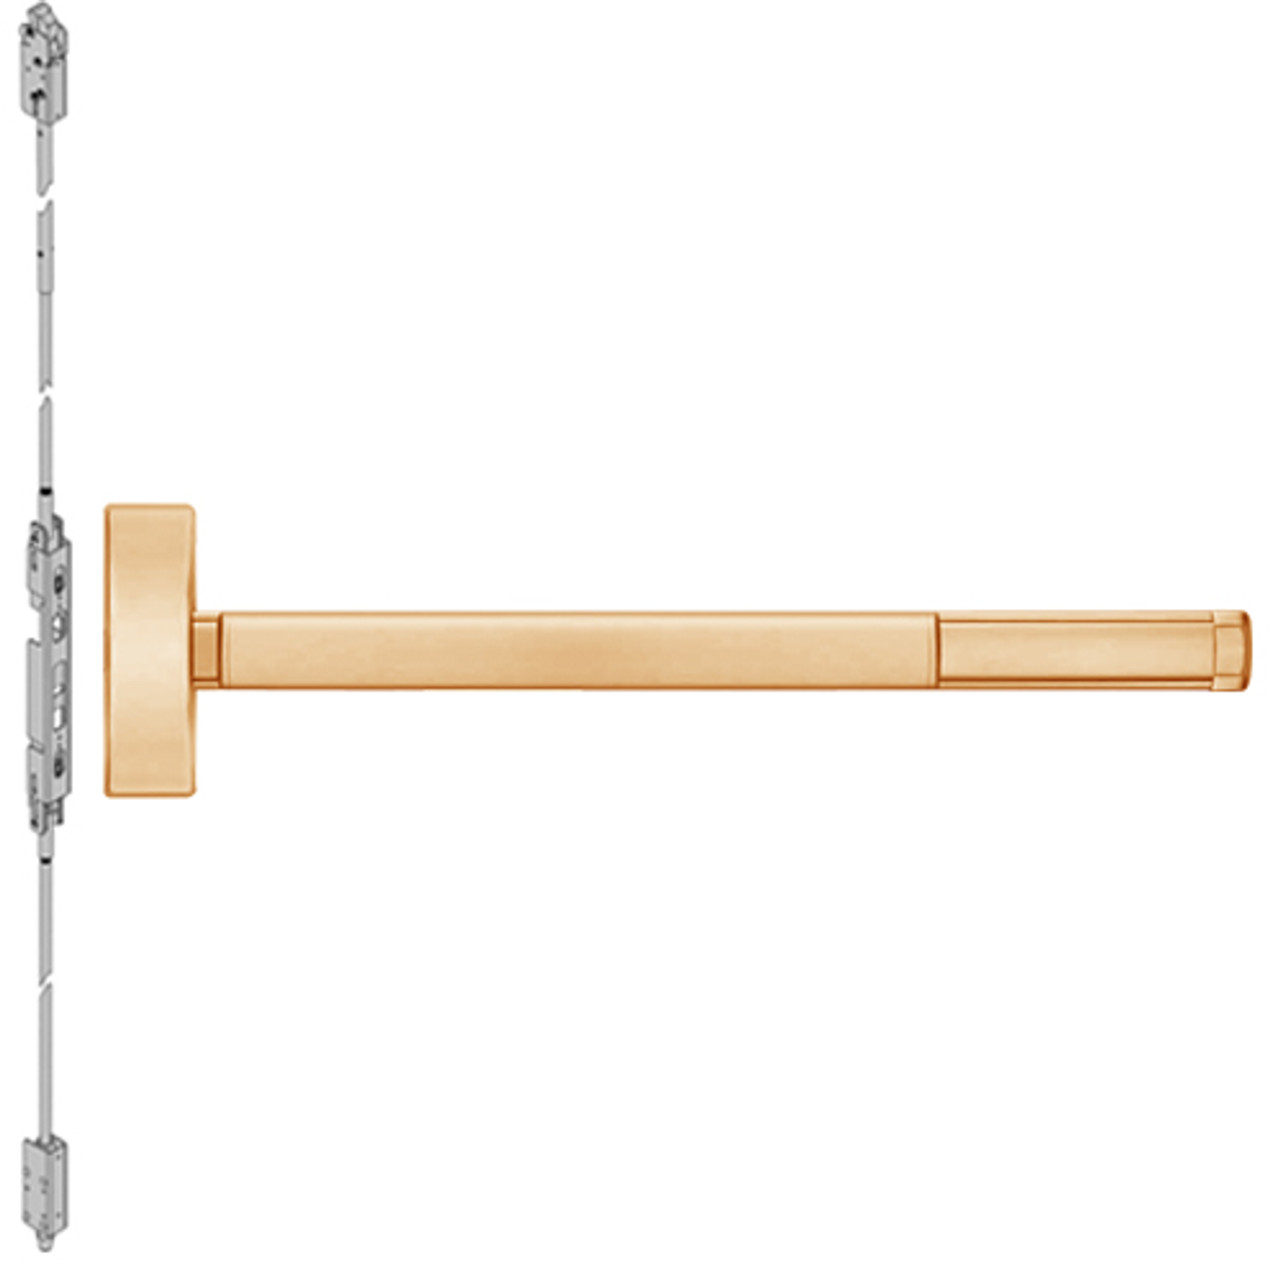 ELRFL2803LBR-612-48 PHI 2800 Series Fire Rated Concealed Vertical Rod Exit Device with Electric Latch Retraction Prepped for Key Retracts Latchbolt in Satin Bronze Finish